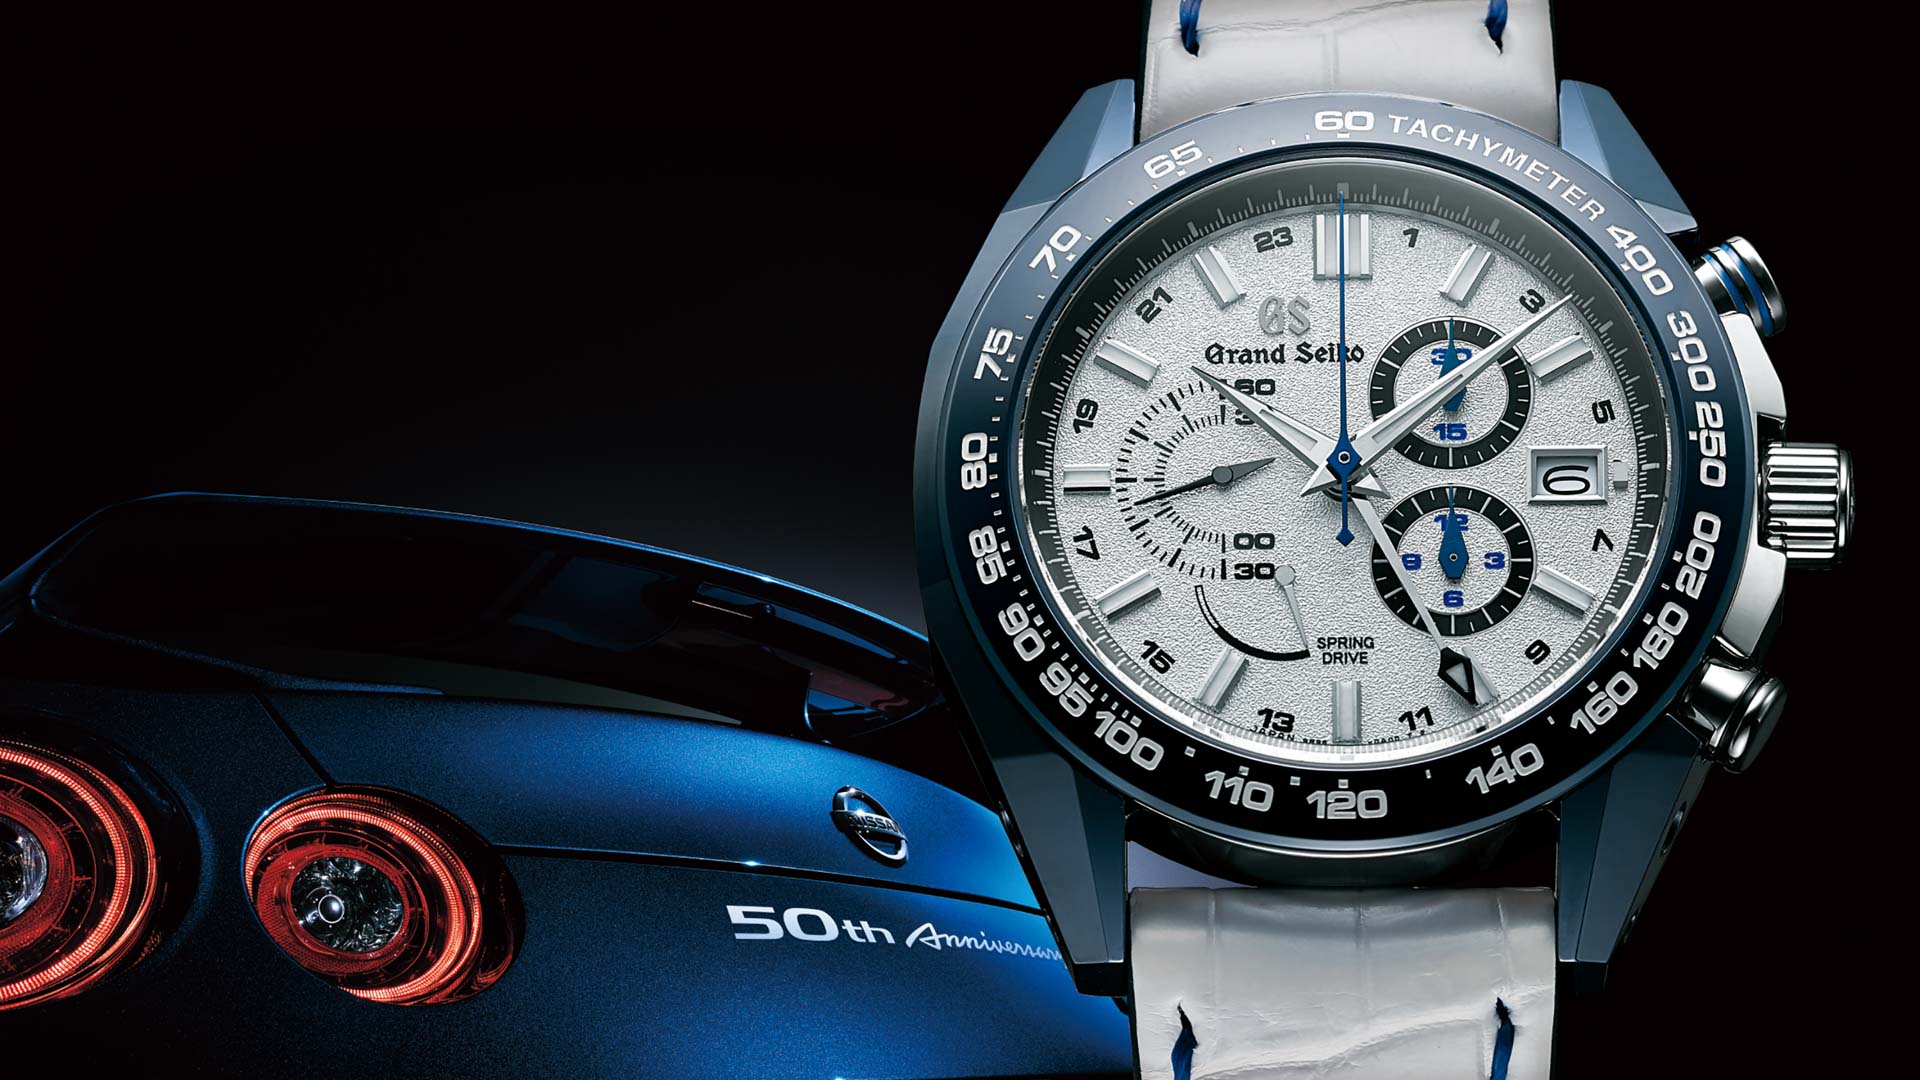 Grand Seiko Spring Drive Nissan GT-R Anniversary Limited Edition SBGC229  Watch | aBlogtoWatch